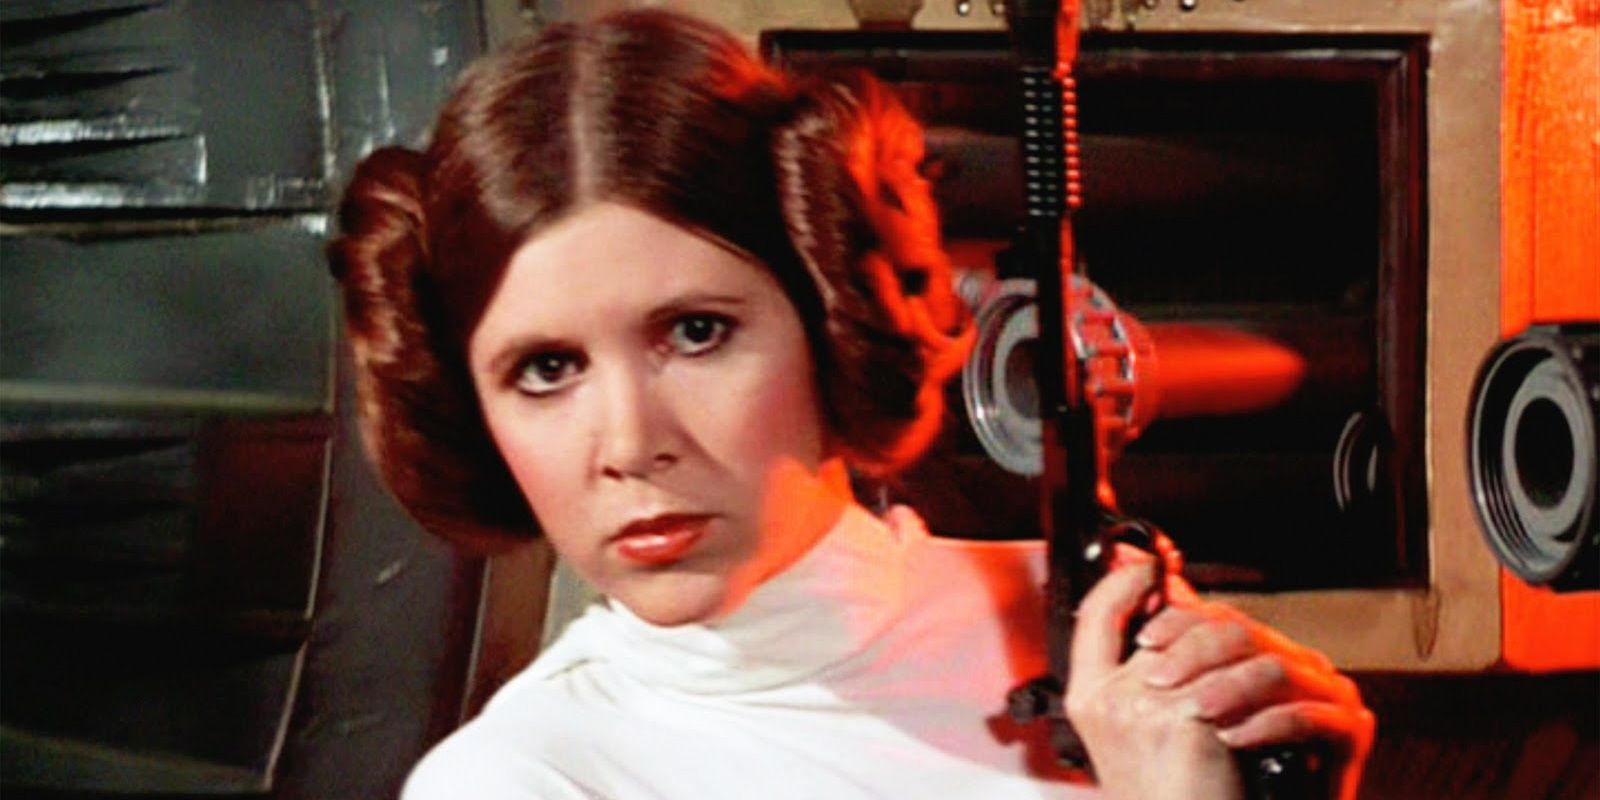 JJ Abrams Shares The Leia Gift He Received From Carrie Fisher